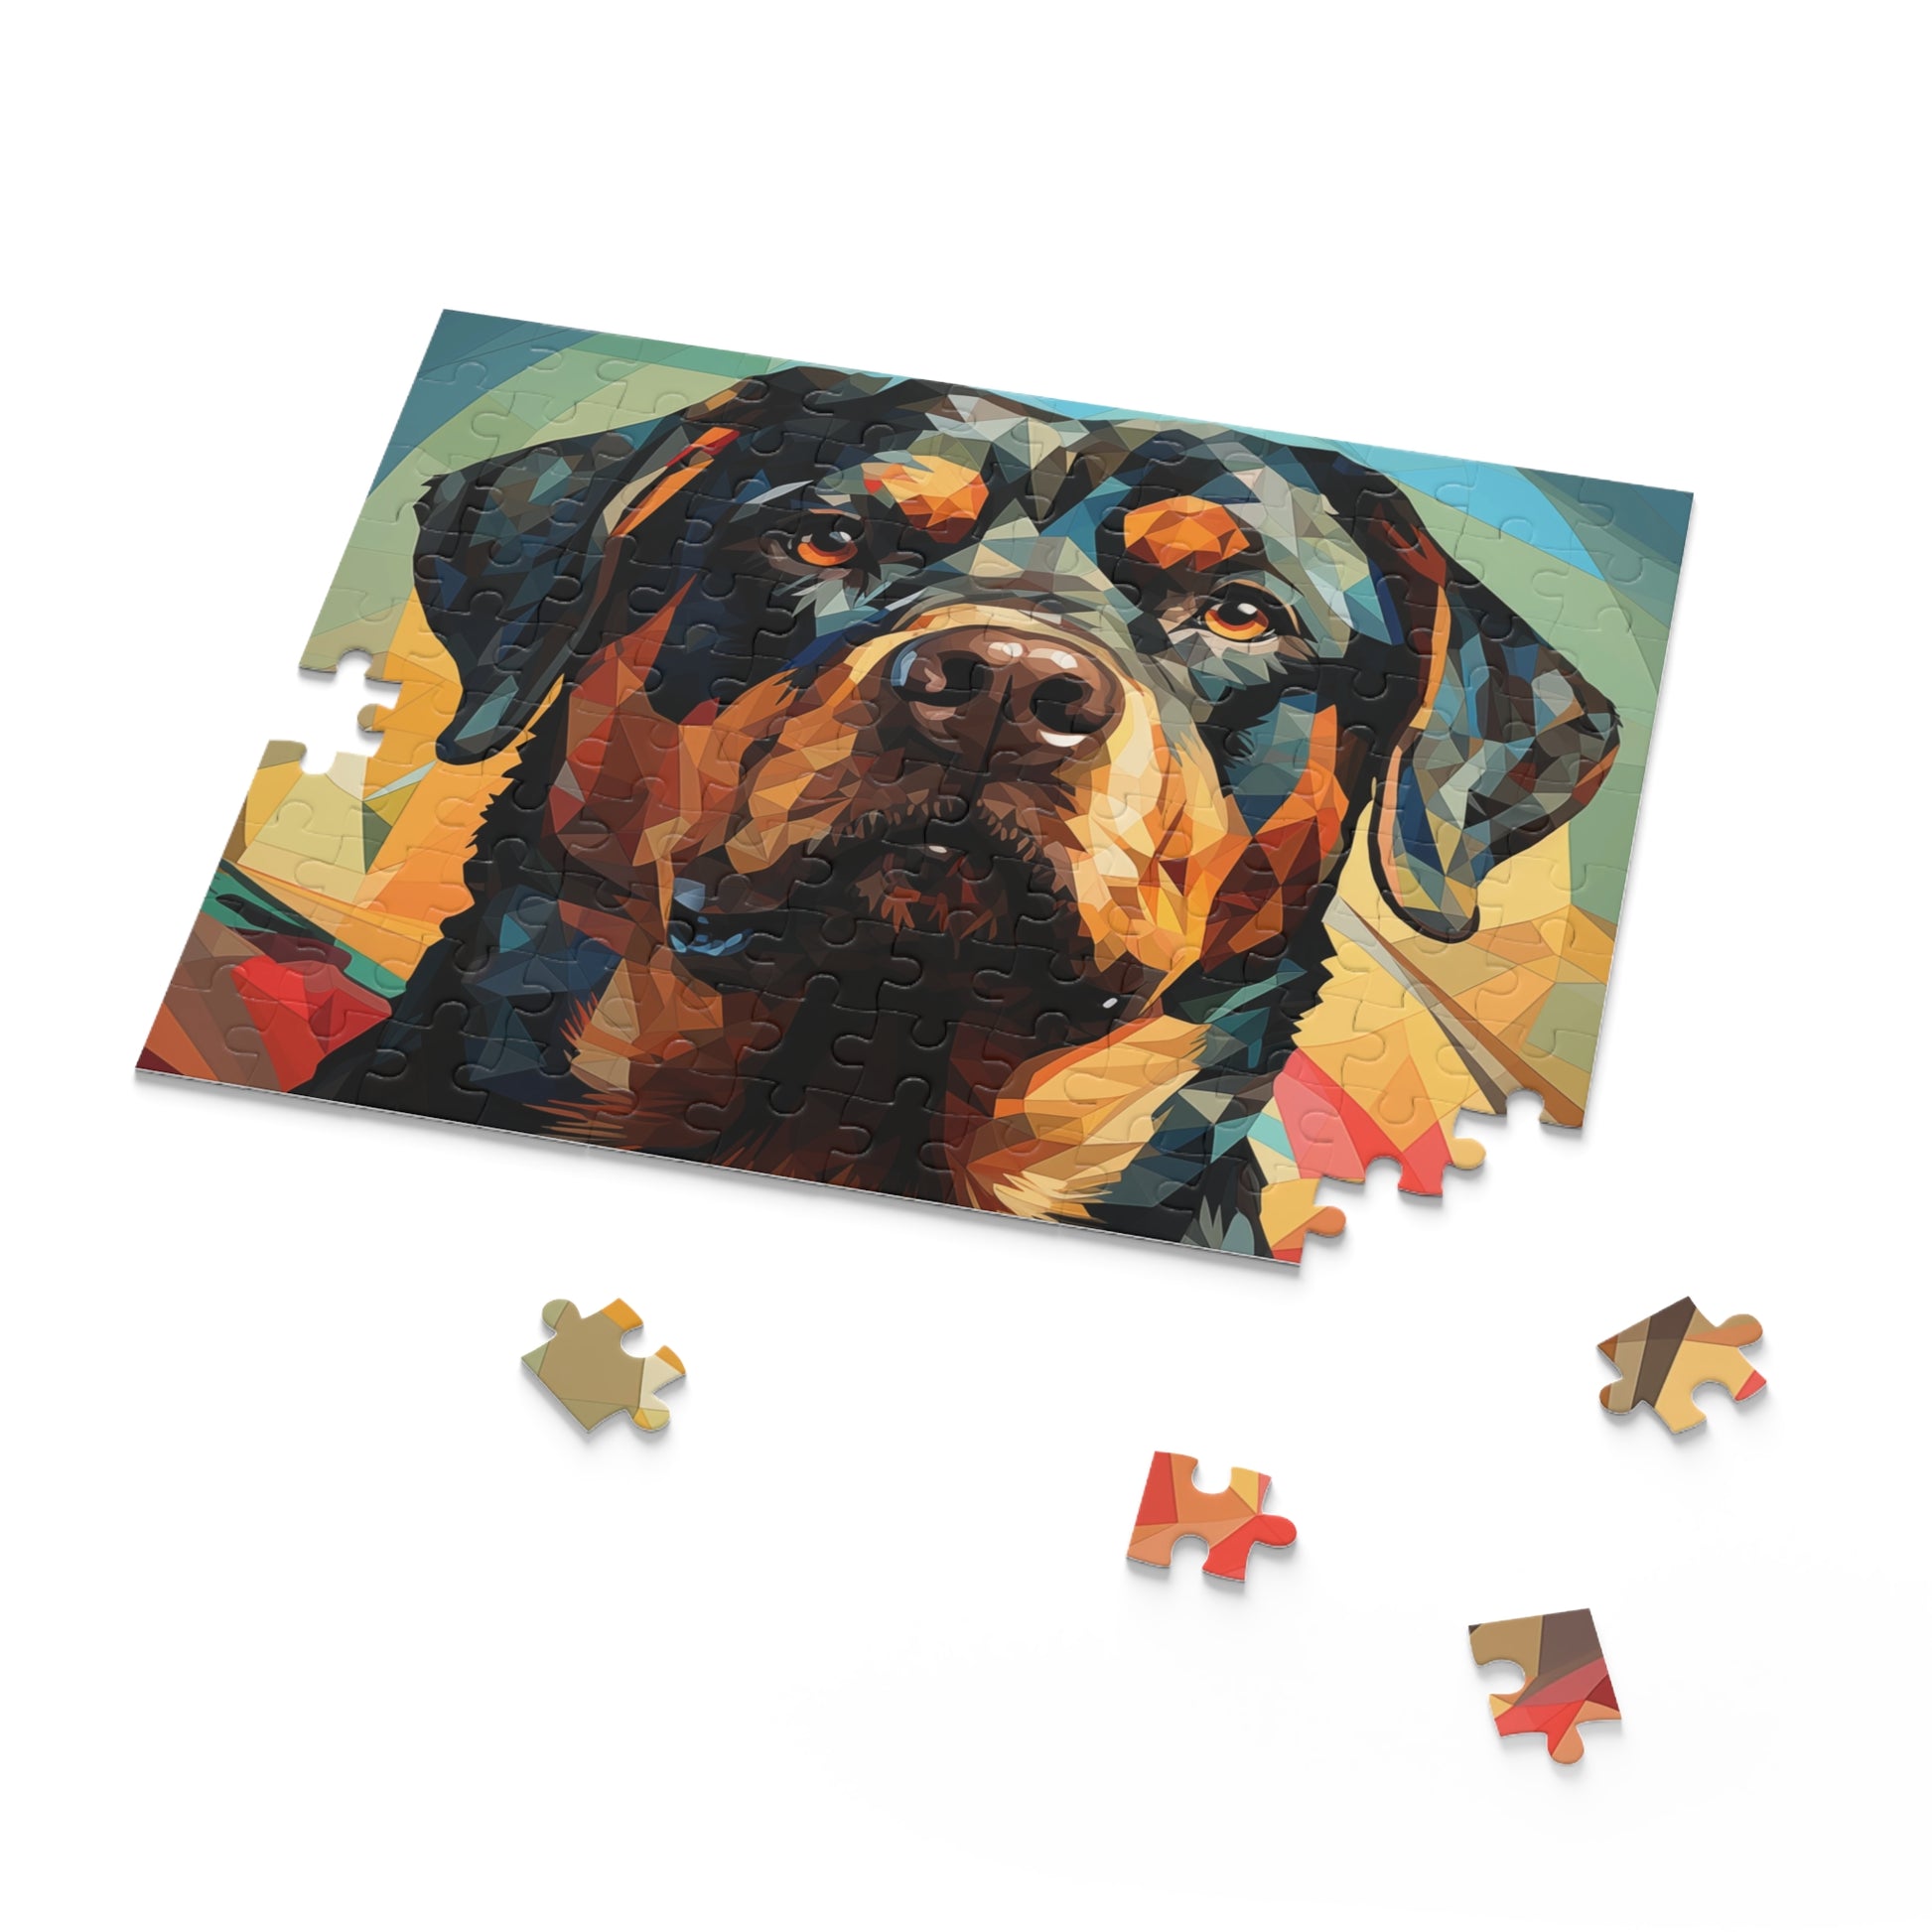 Rottweiler Dog Abstract Watercolor Jigsaw Puzzle Adult Birthday Business Jigsaw Puzzle Gift for Him Funny Humorous Indoor Outdoor Game Gift For Her Online-7